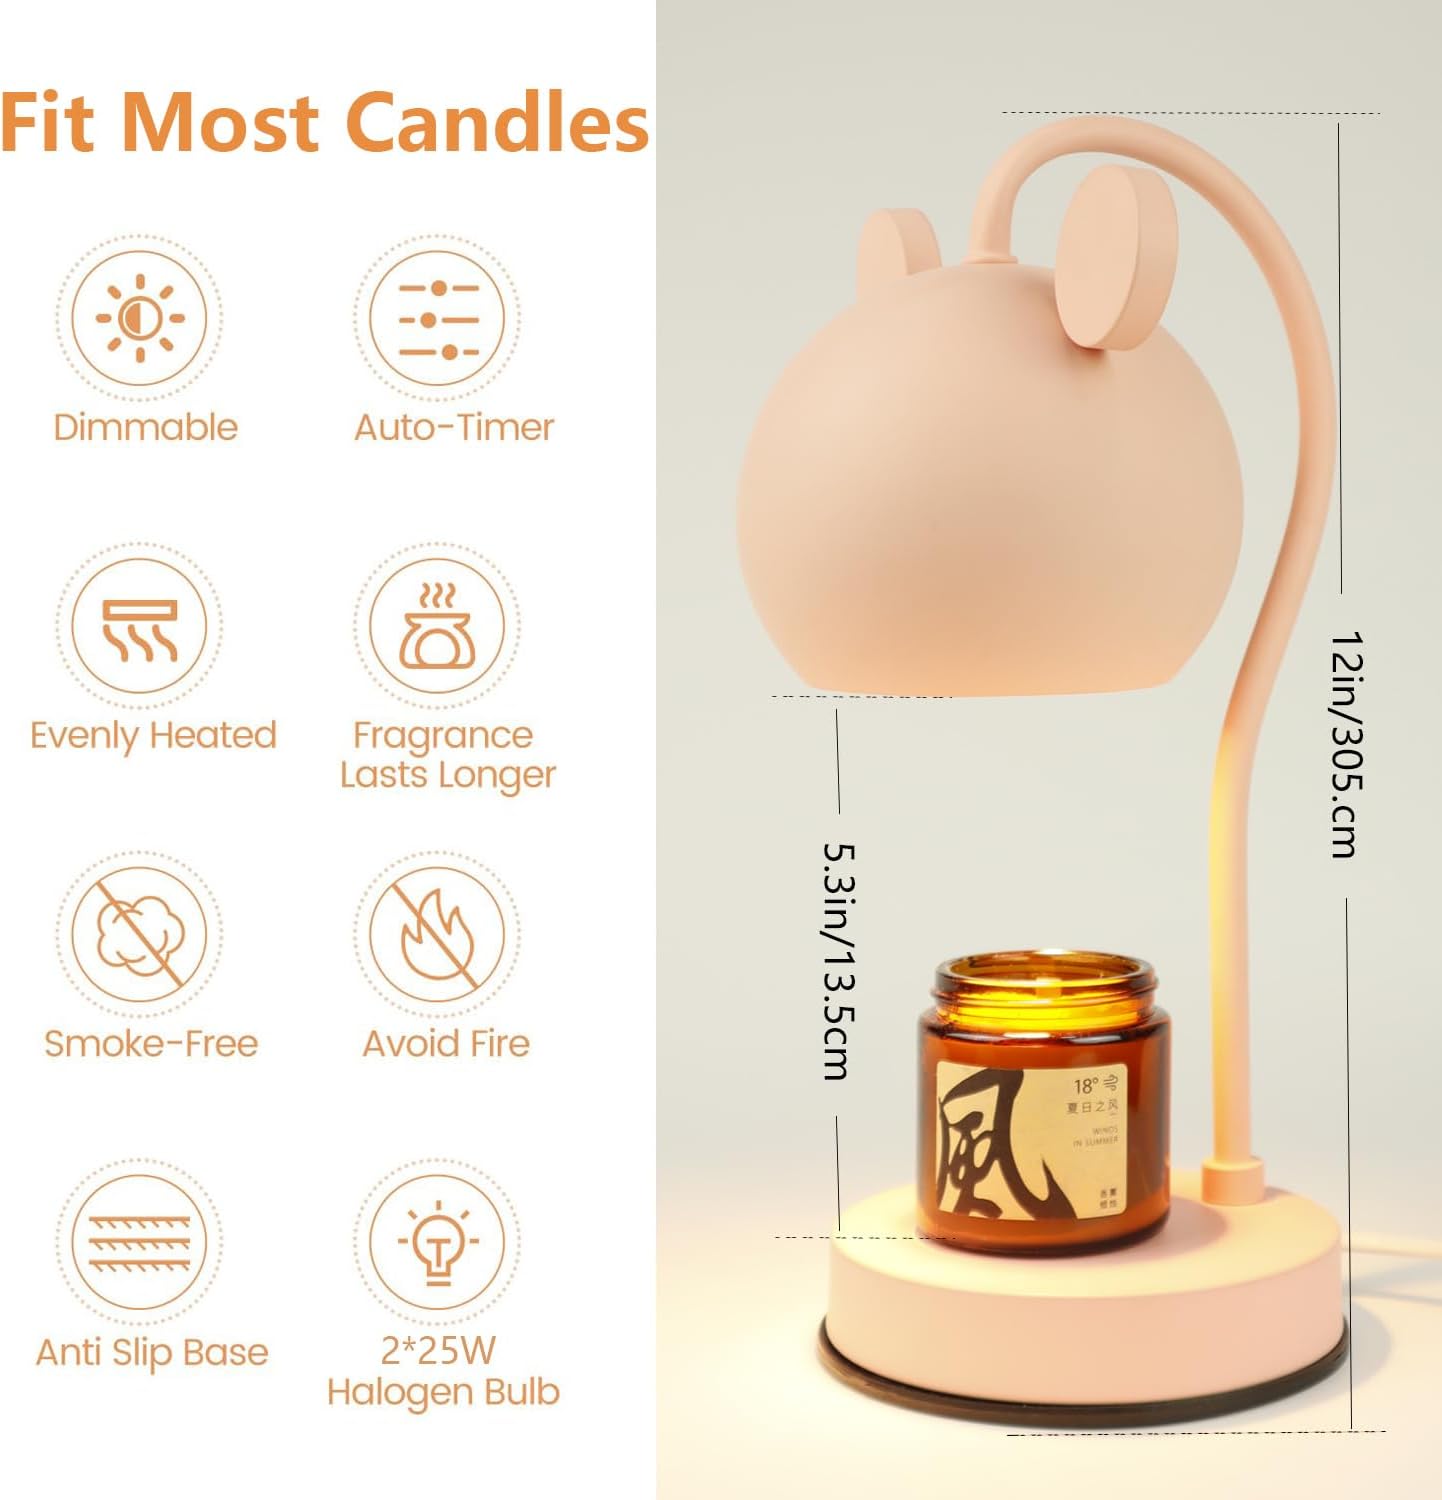 Candle Warmer Lamp with Timer, Dimmable Candle Lamp with 2 Bulbs, Electric Wax Melt Warmer for Jar Candle, Aromatic Candle Holders for Gifts, for Home Bedroom Decor